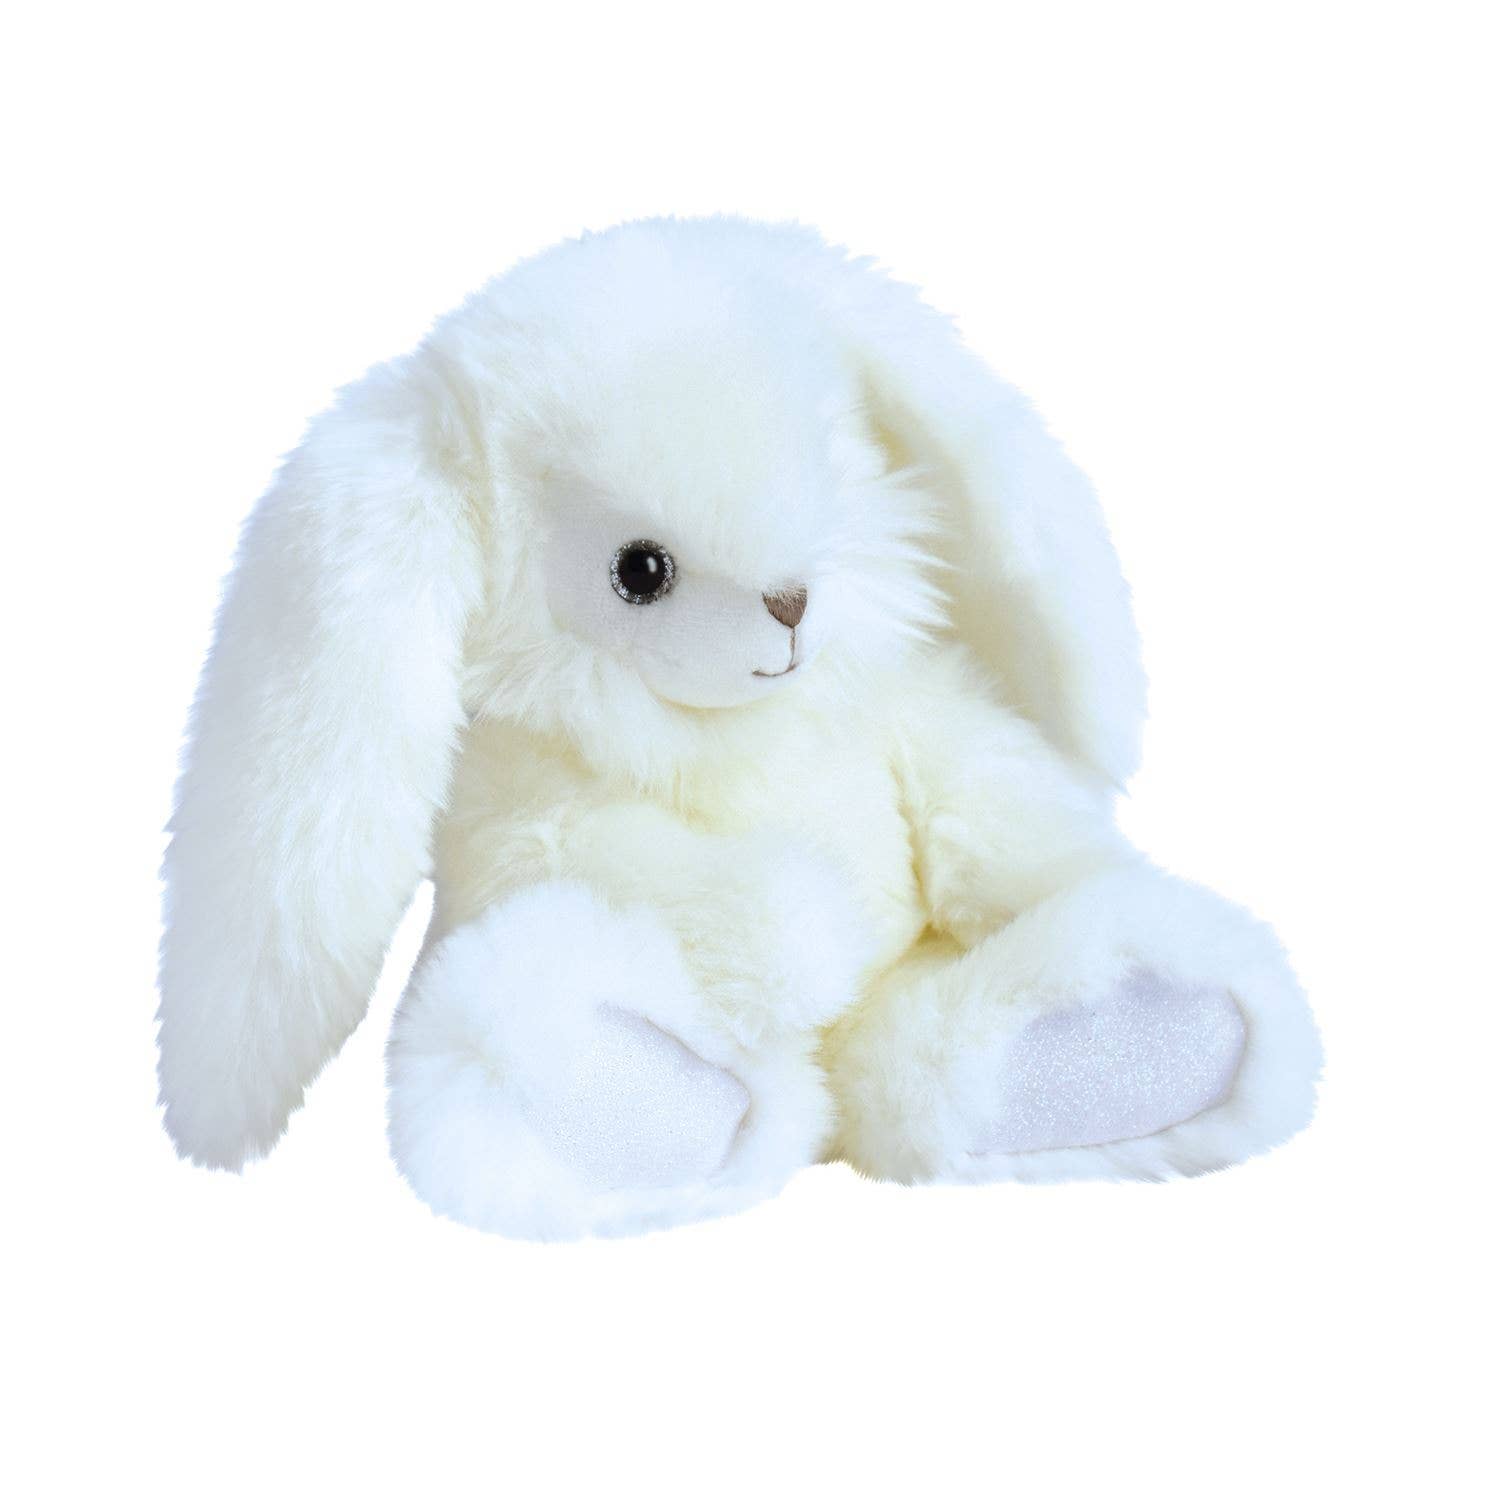 Front view of white dapper rabbit with box.